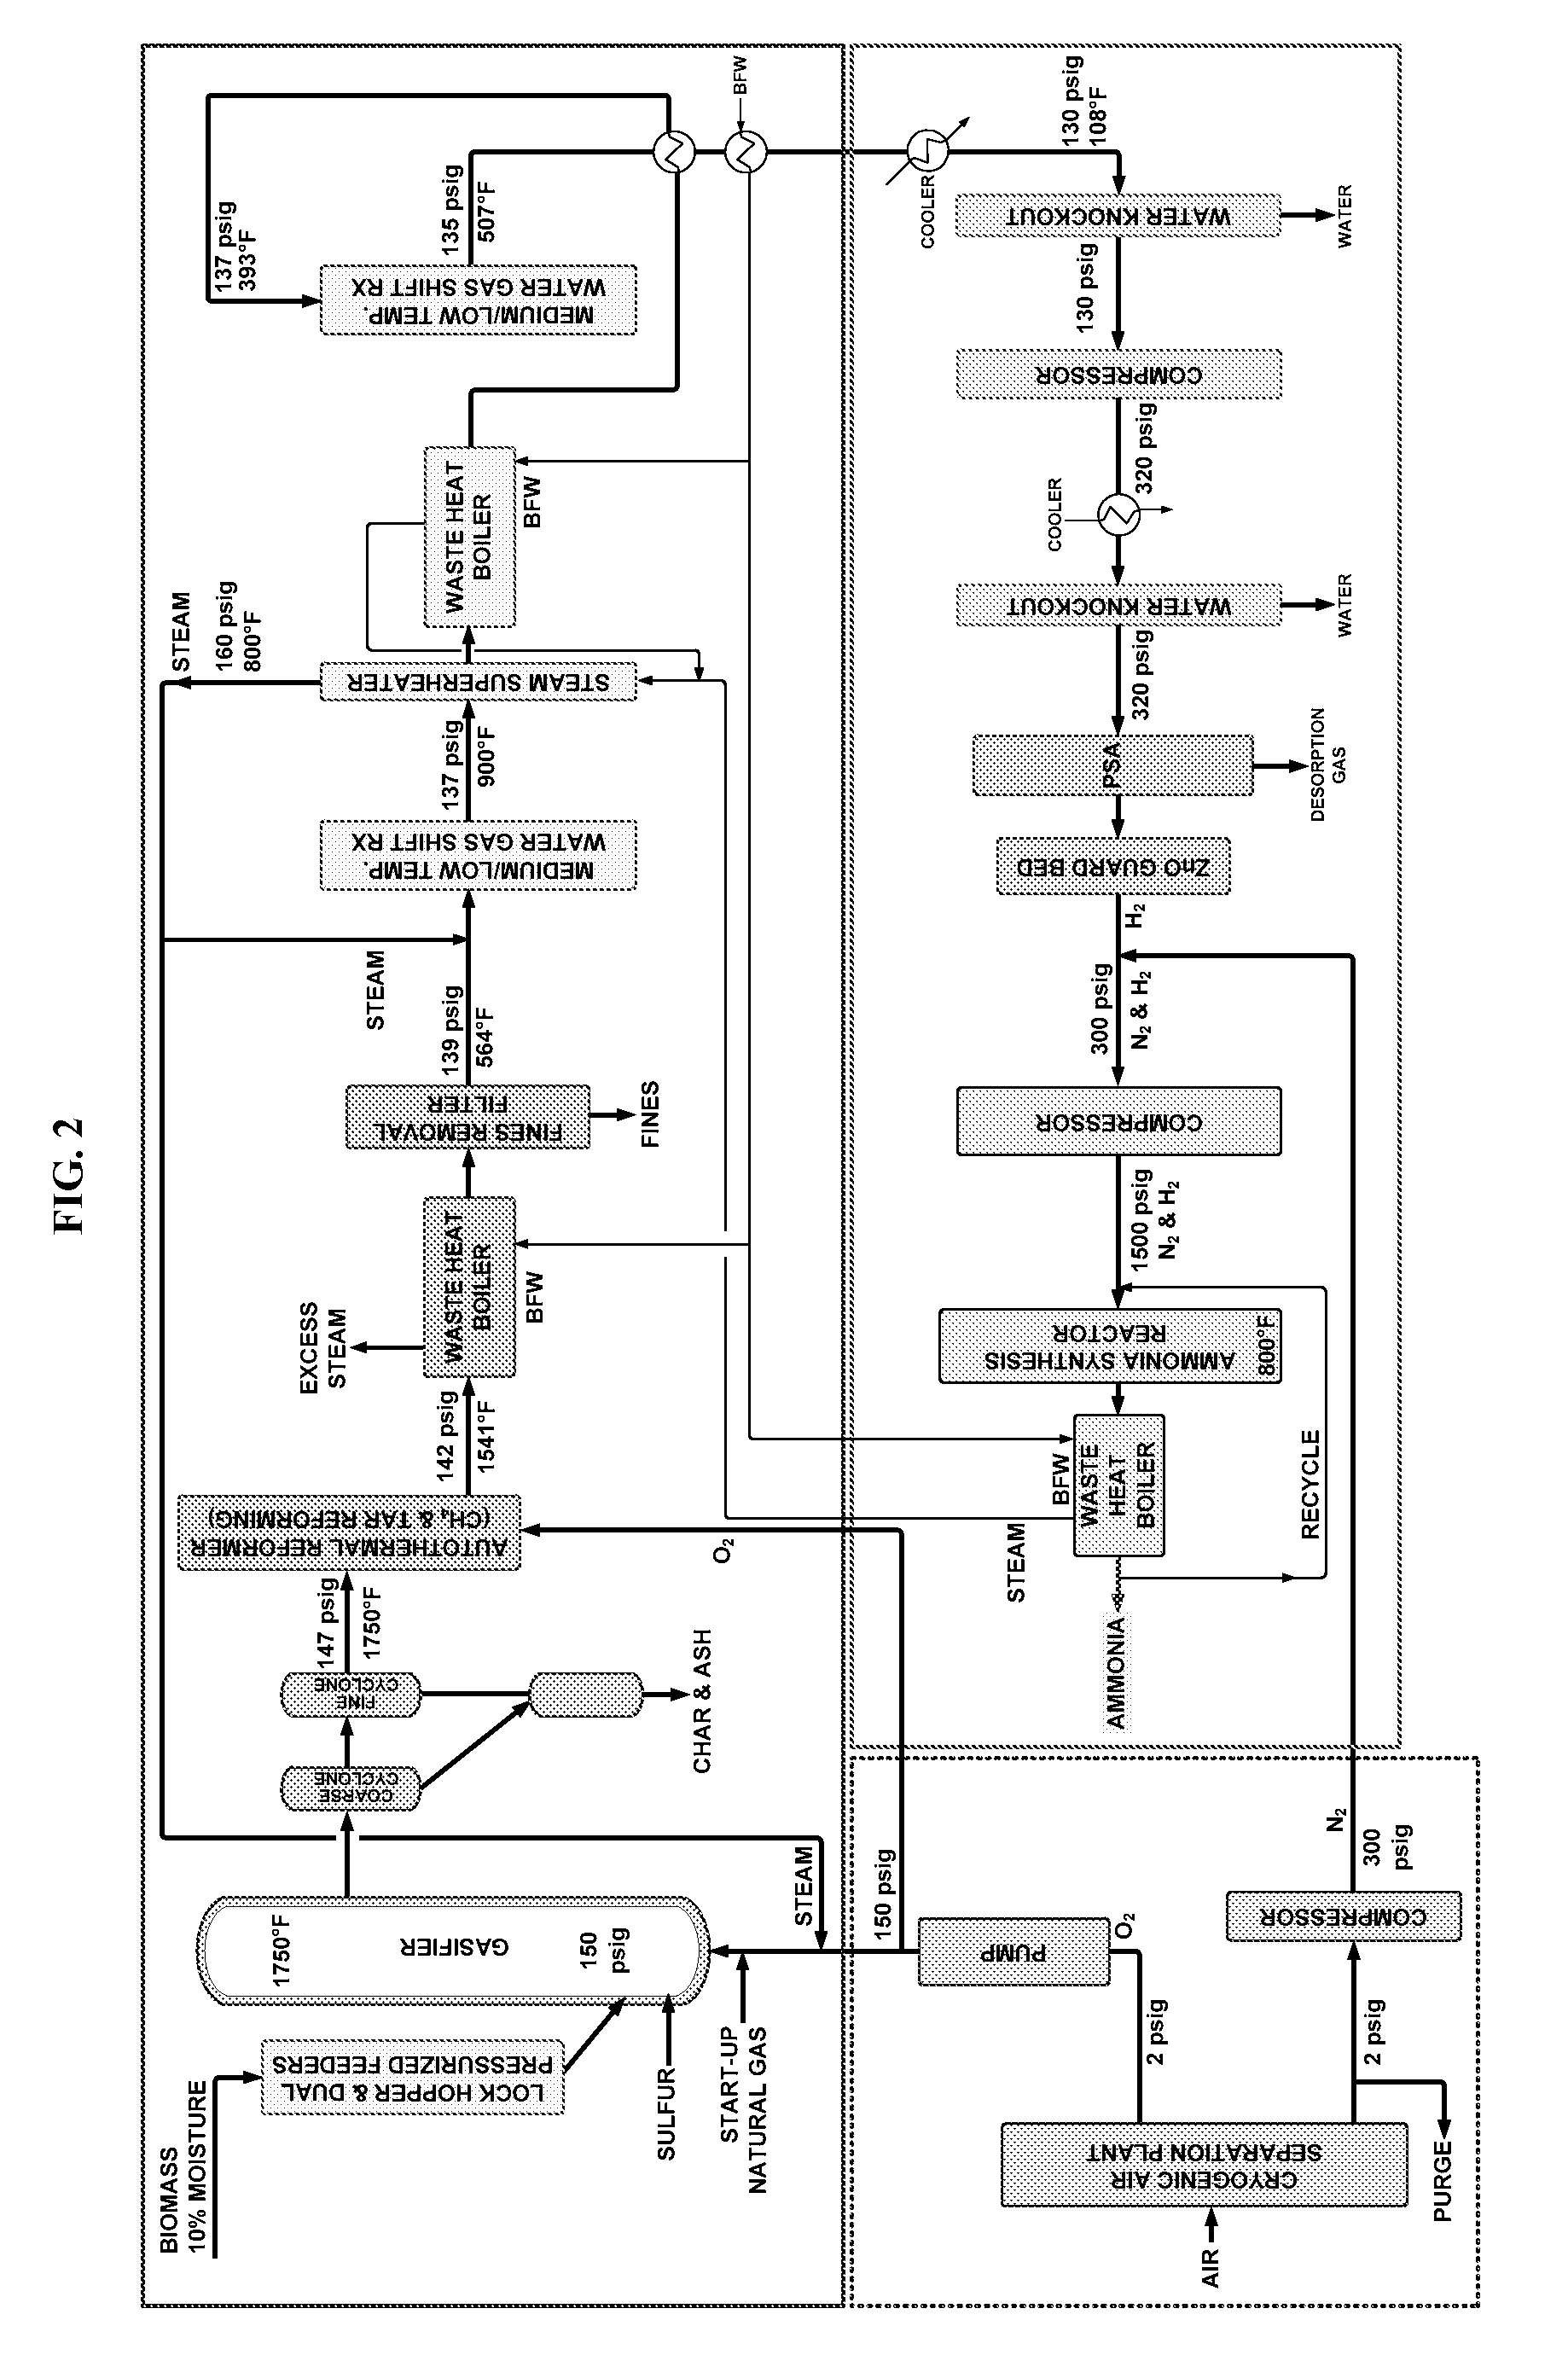 Process for producing ammonia from biomass